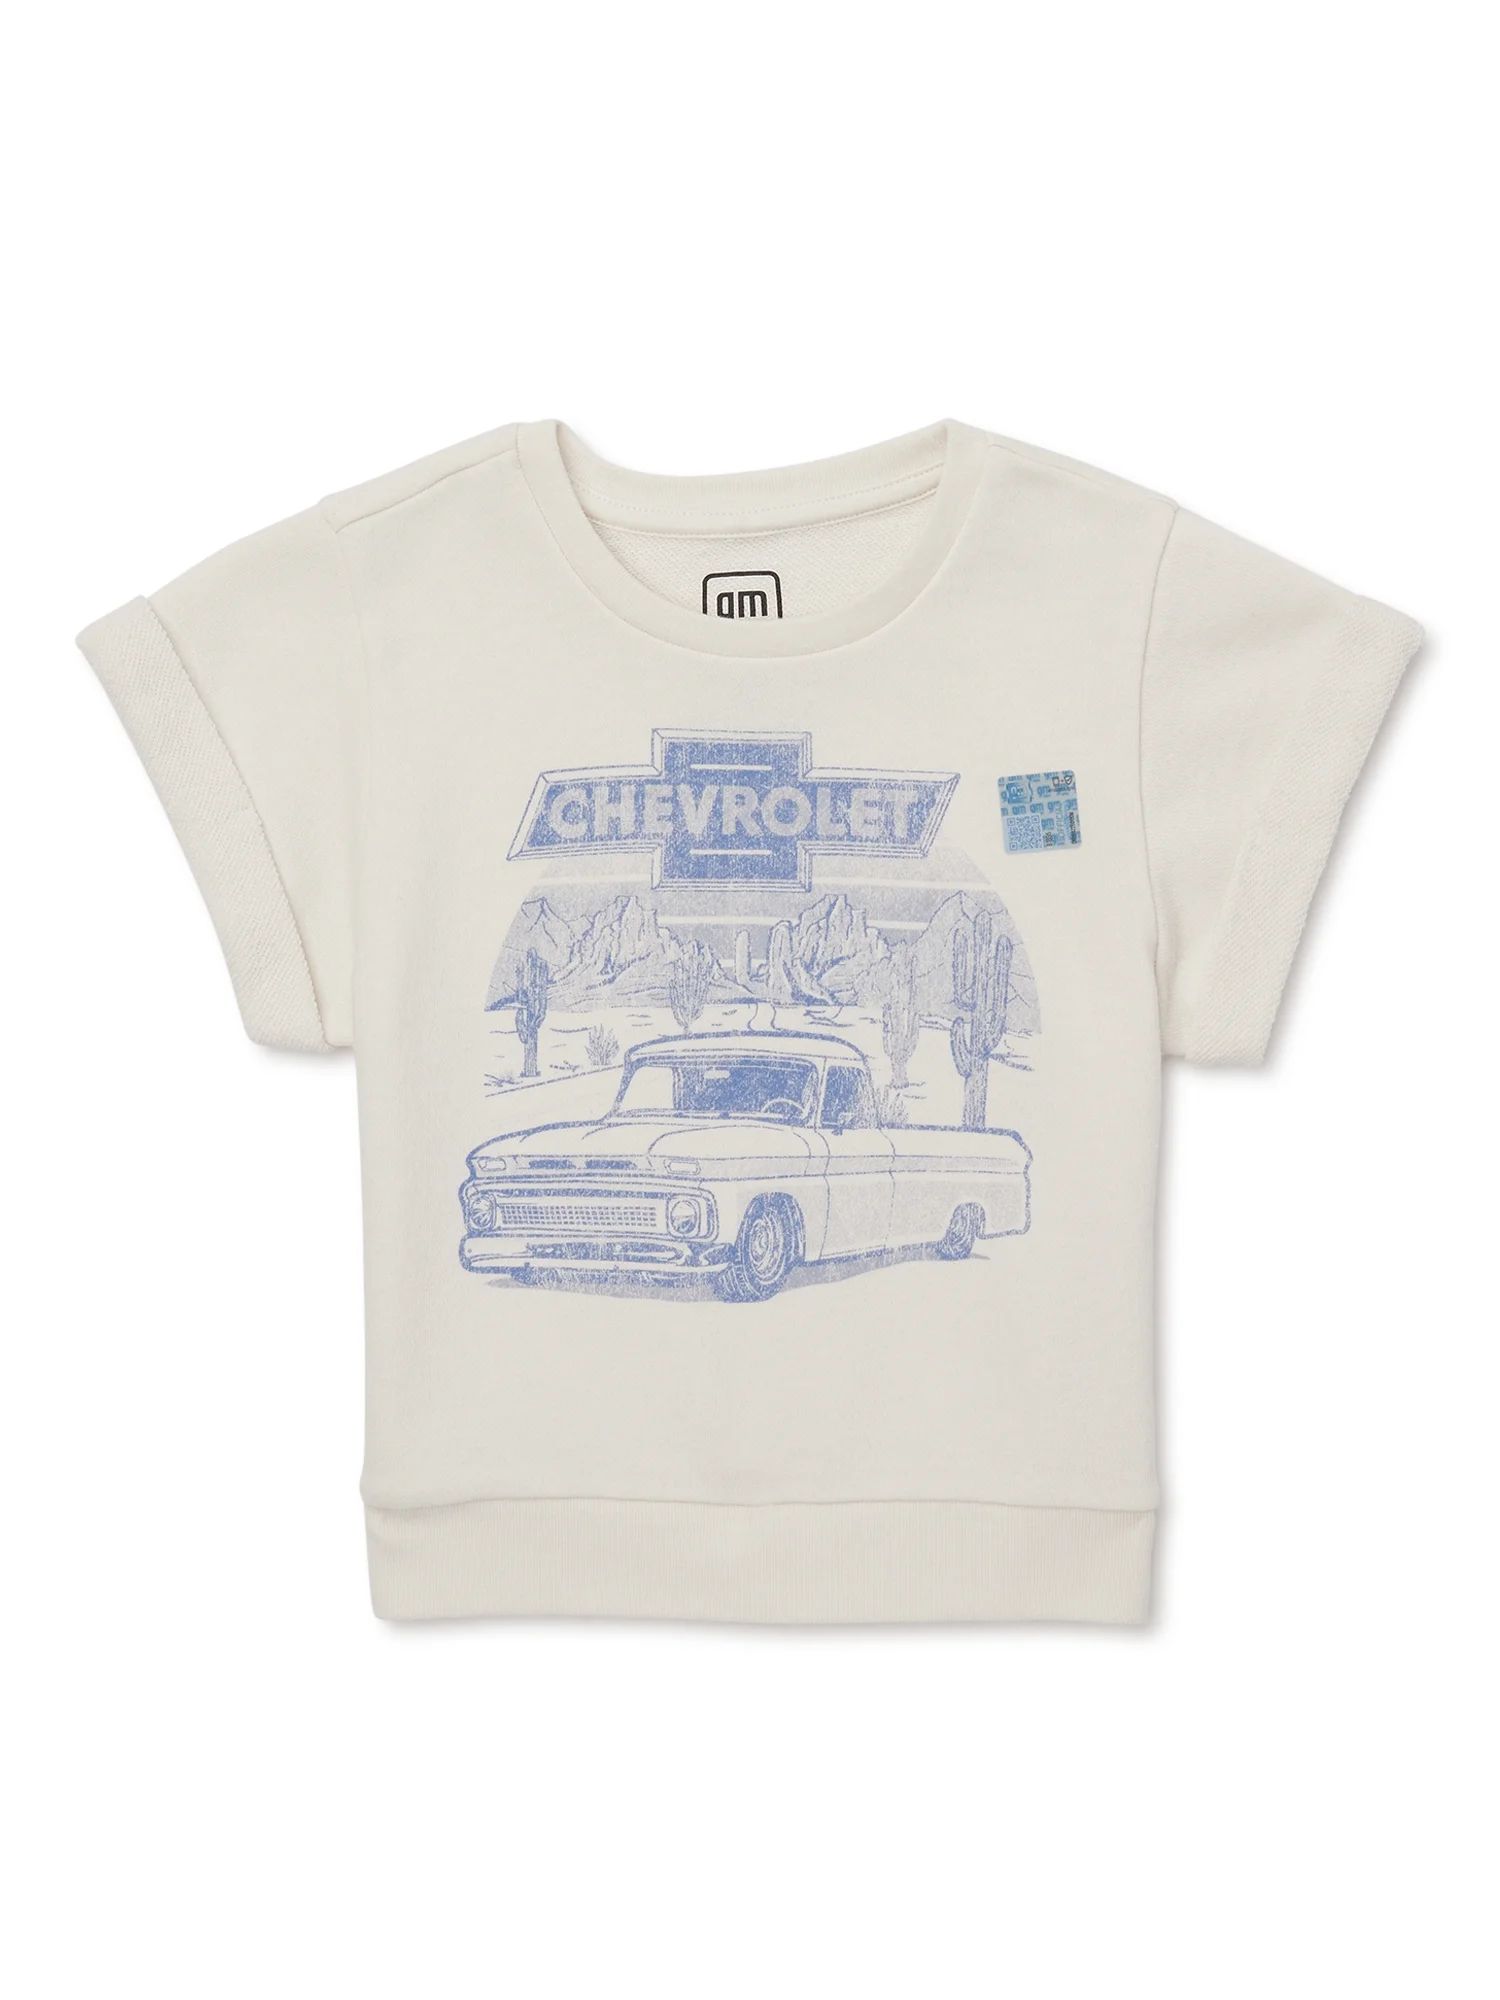 Chevrolet Toddler Boys Pickup Truck Graphic T-Shirt with Short Sleeves, Sizes 12M-5T | Walmart (US)